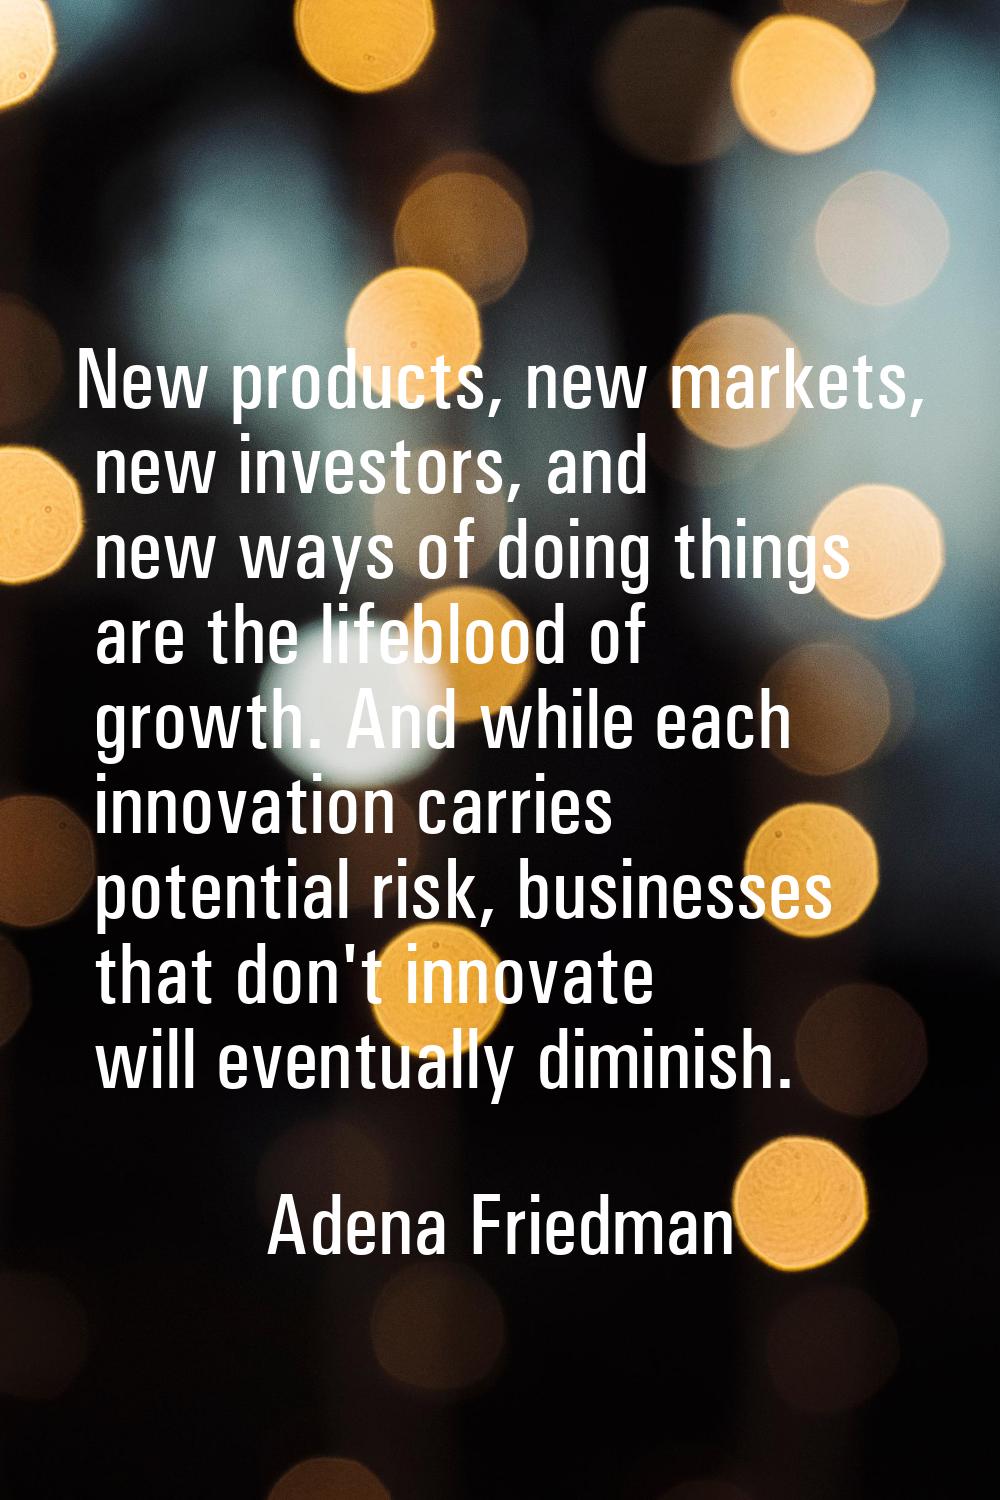 New products, new markets, new investors, and new ways of doing things are the lifeblood of growth.